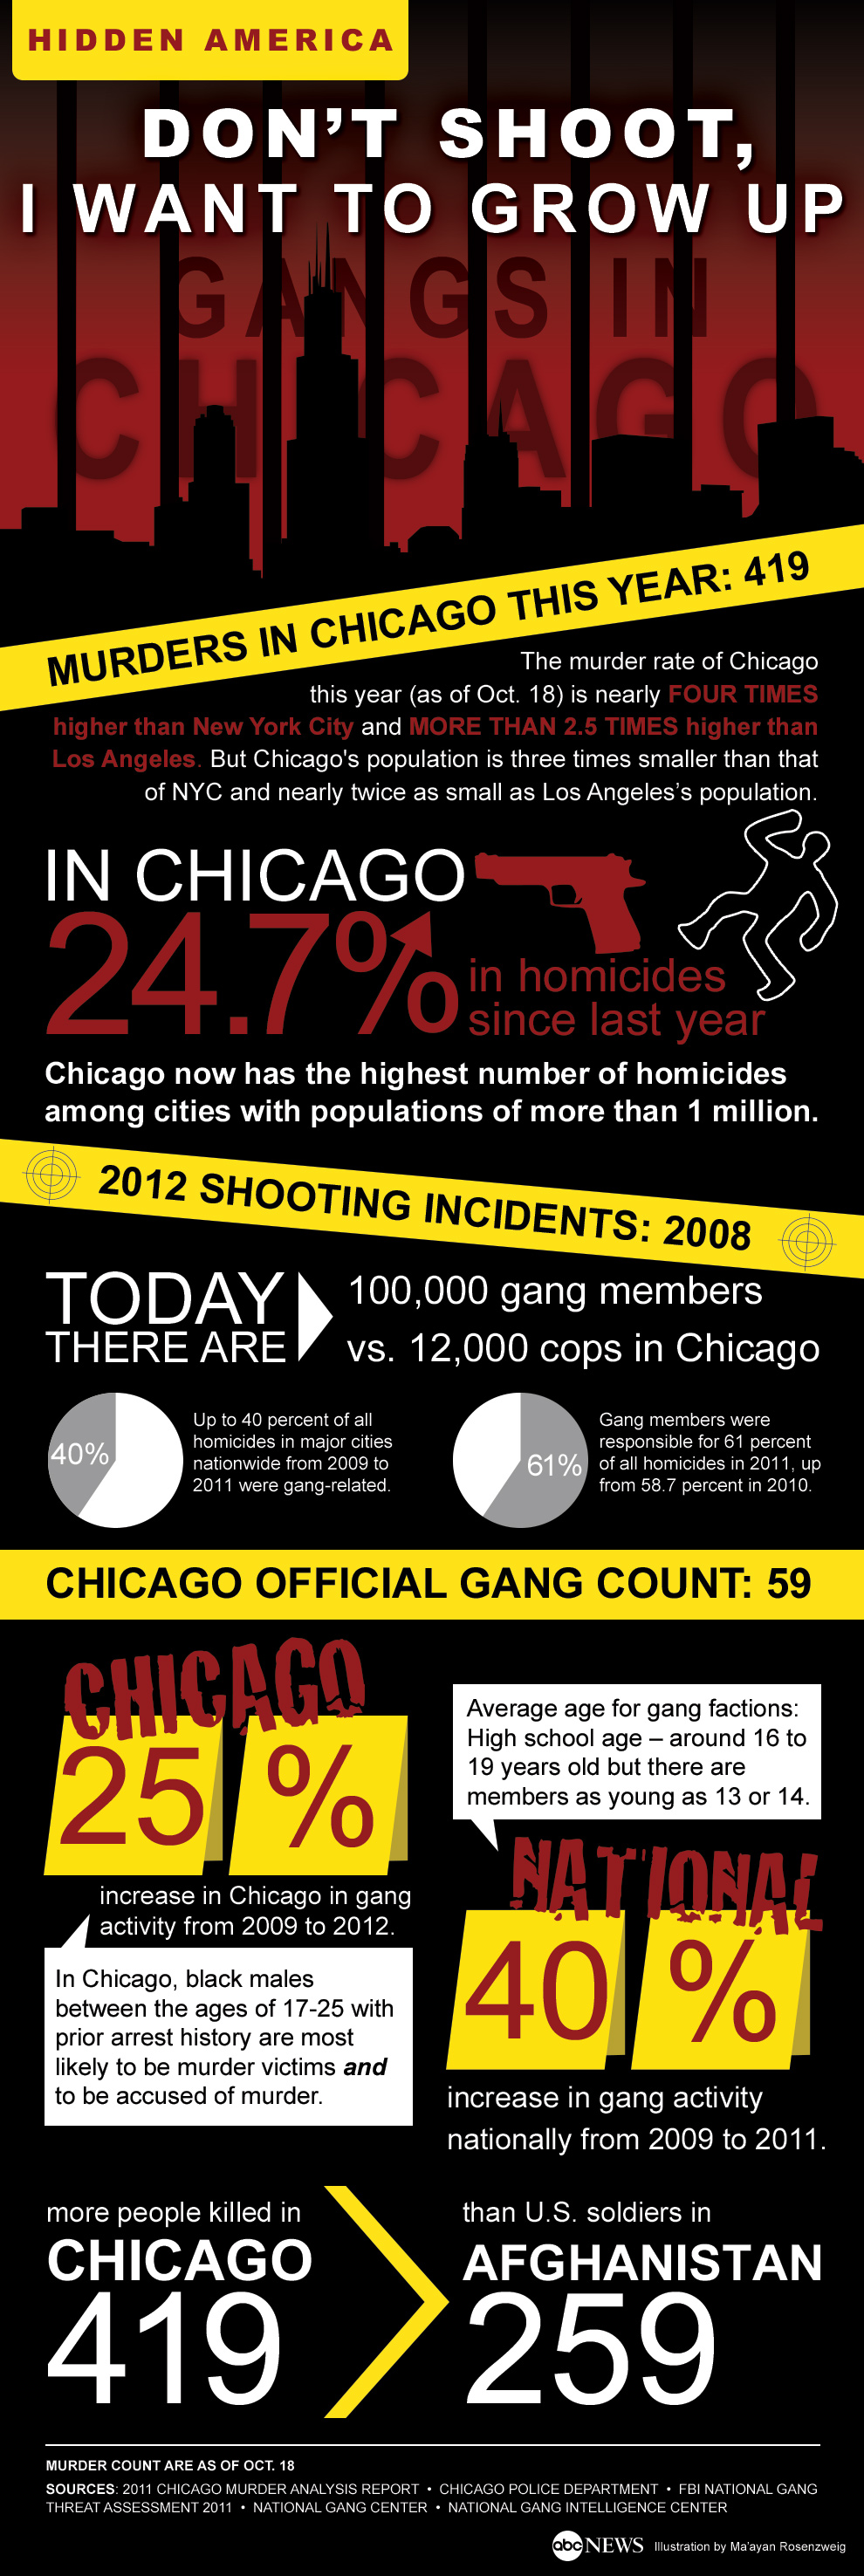 chicago_gang_violence_summit_infographic.jpg